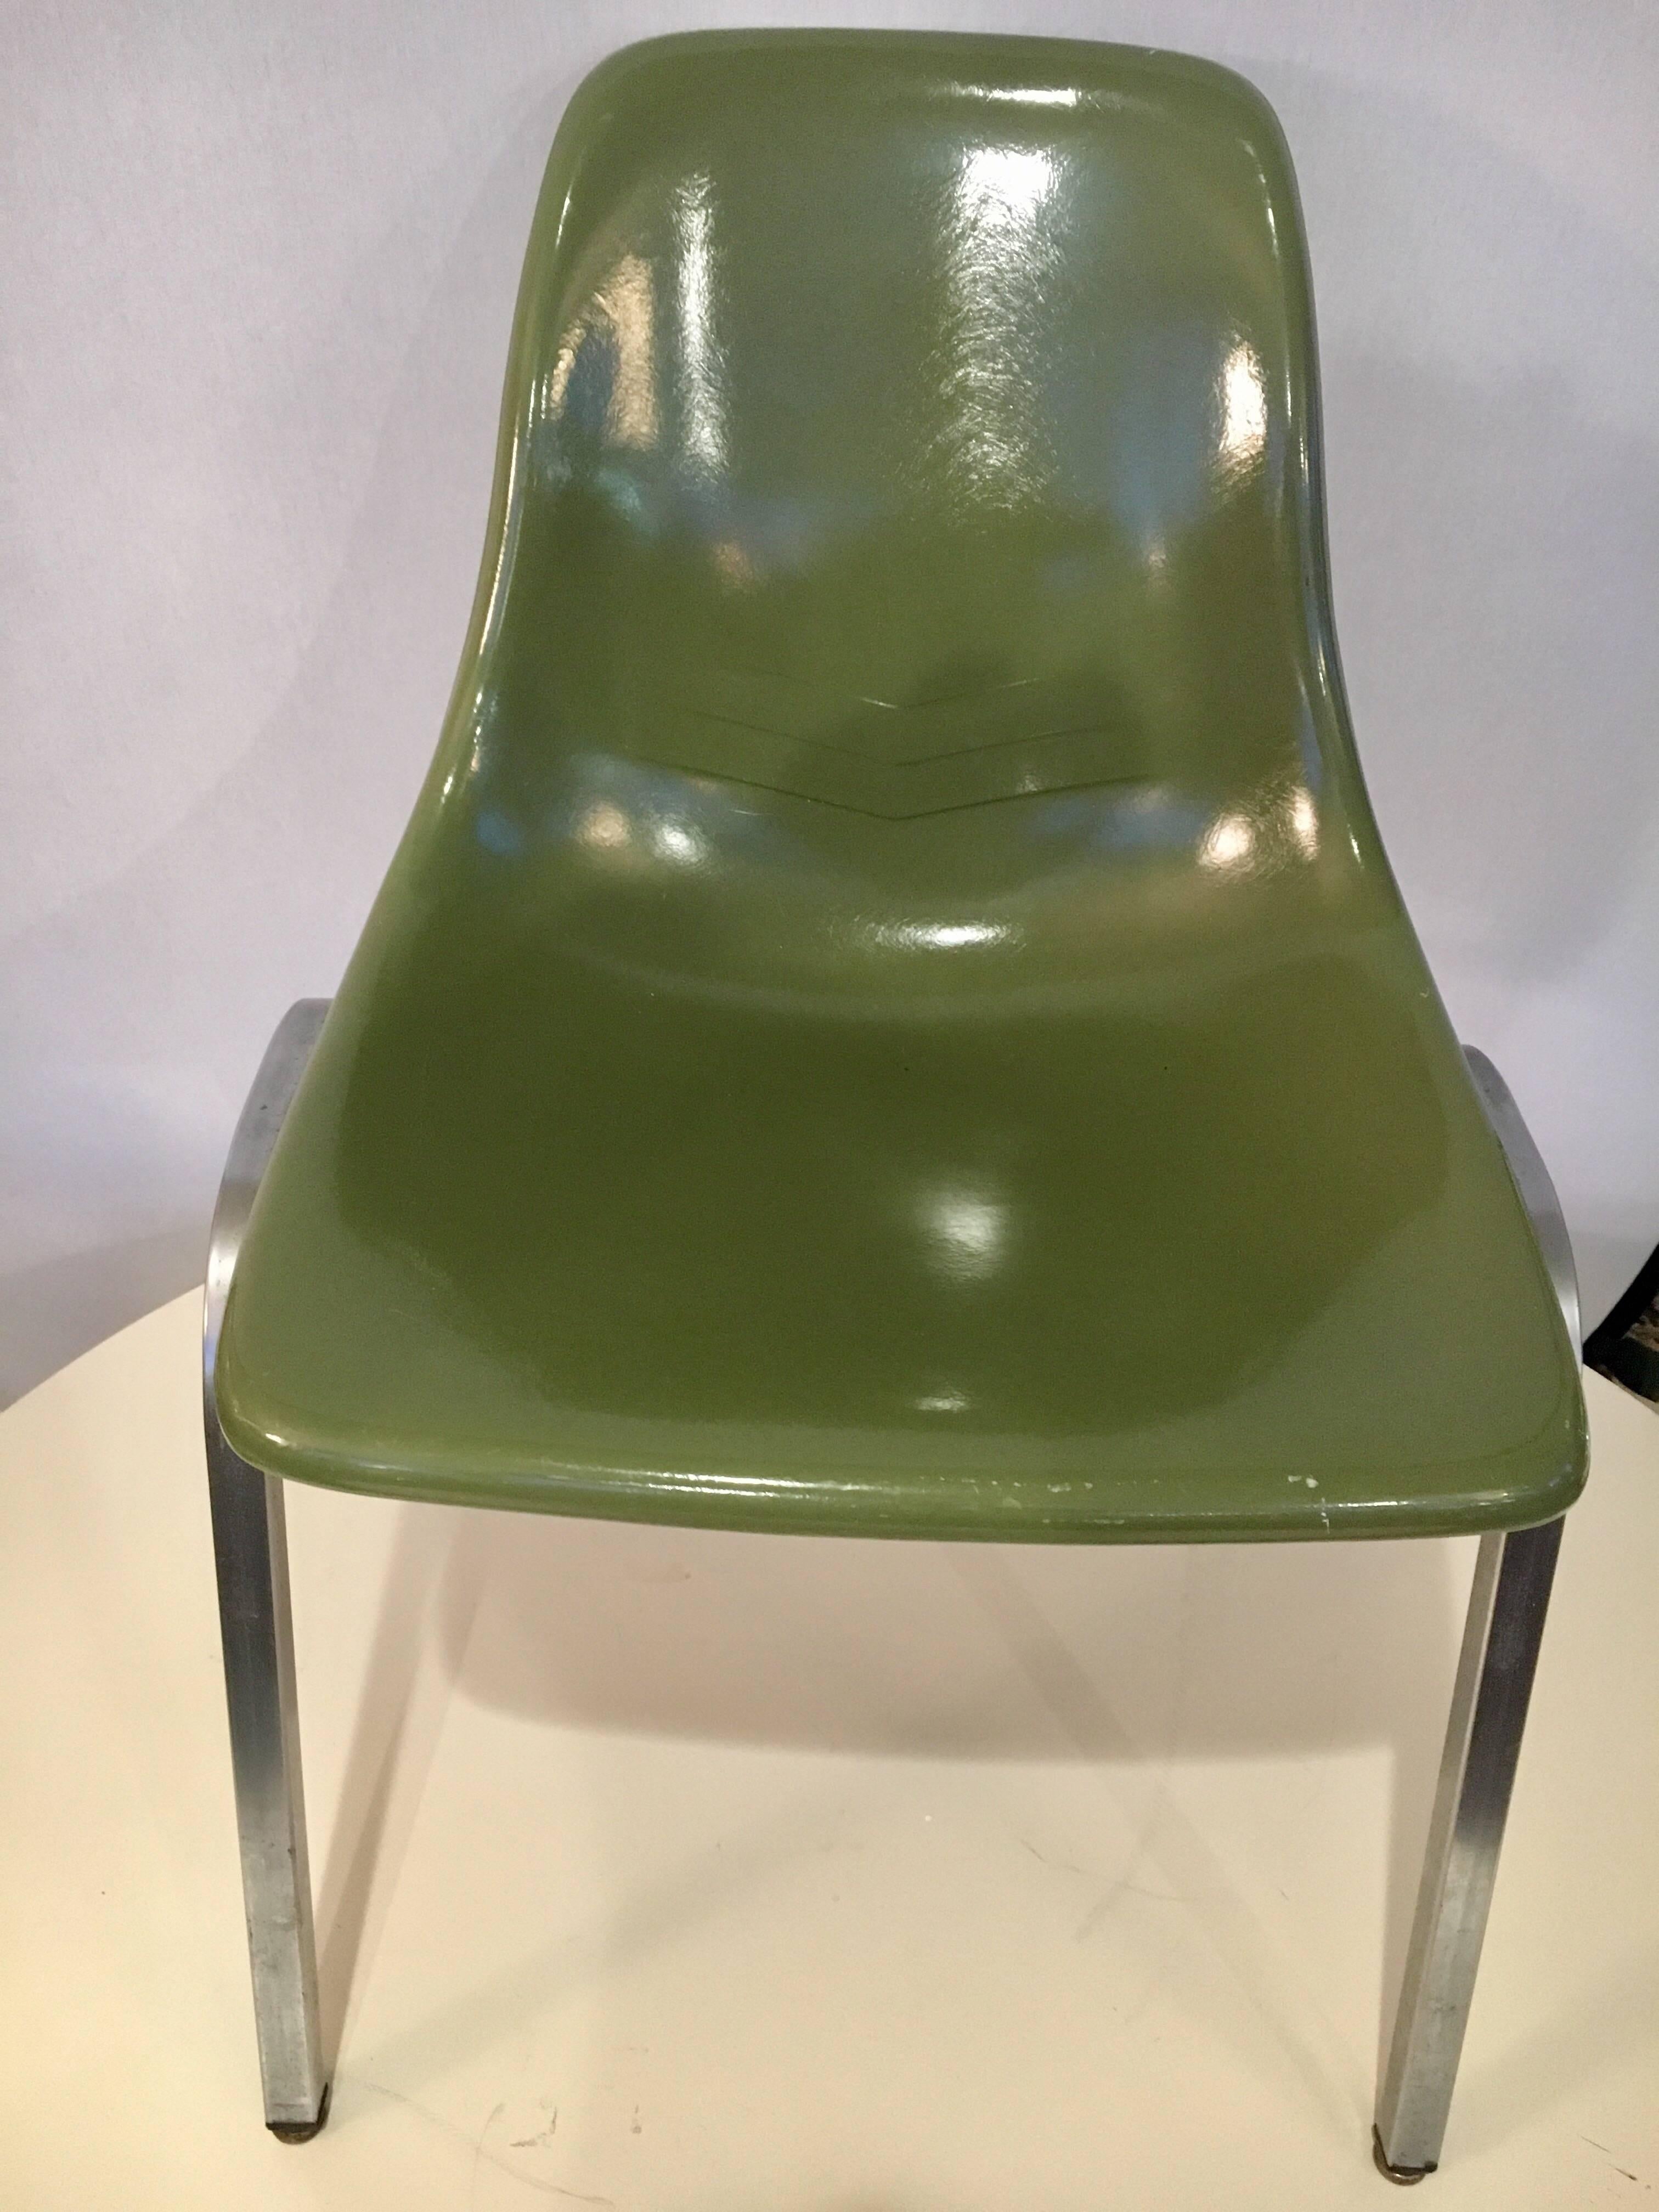 Rare olive green color scheme set of five matching Howell fiberglass chairs. Manufacturer hallmarks on base of chairs.